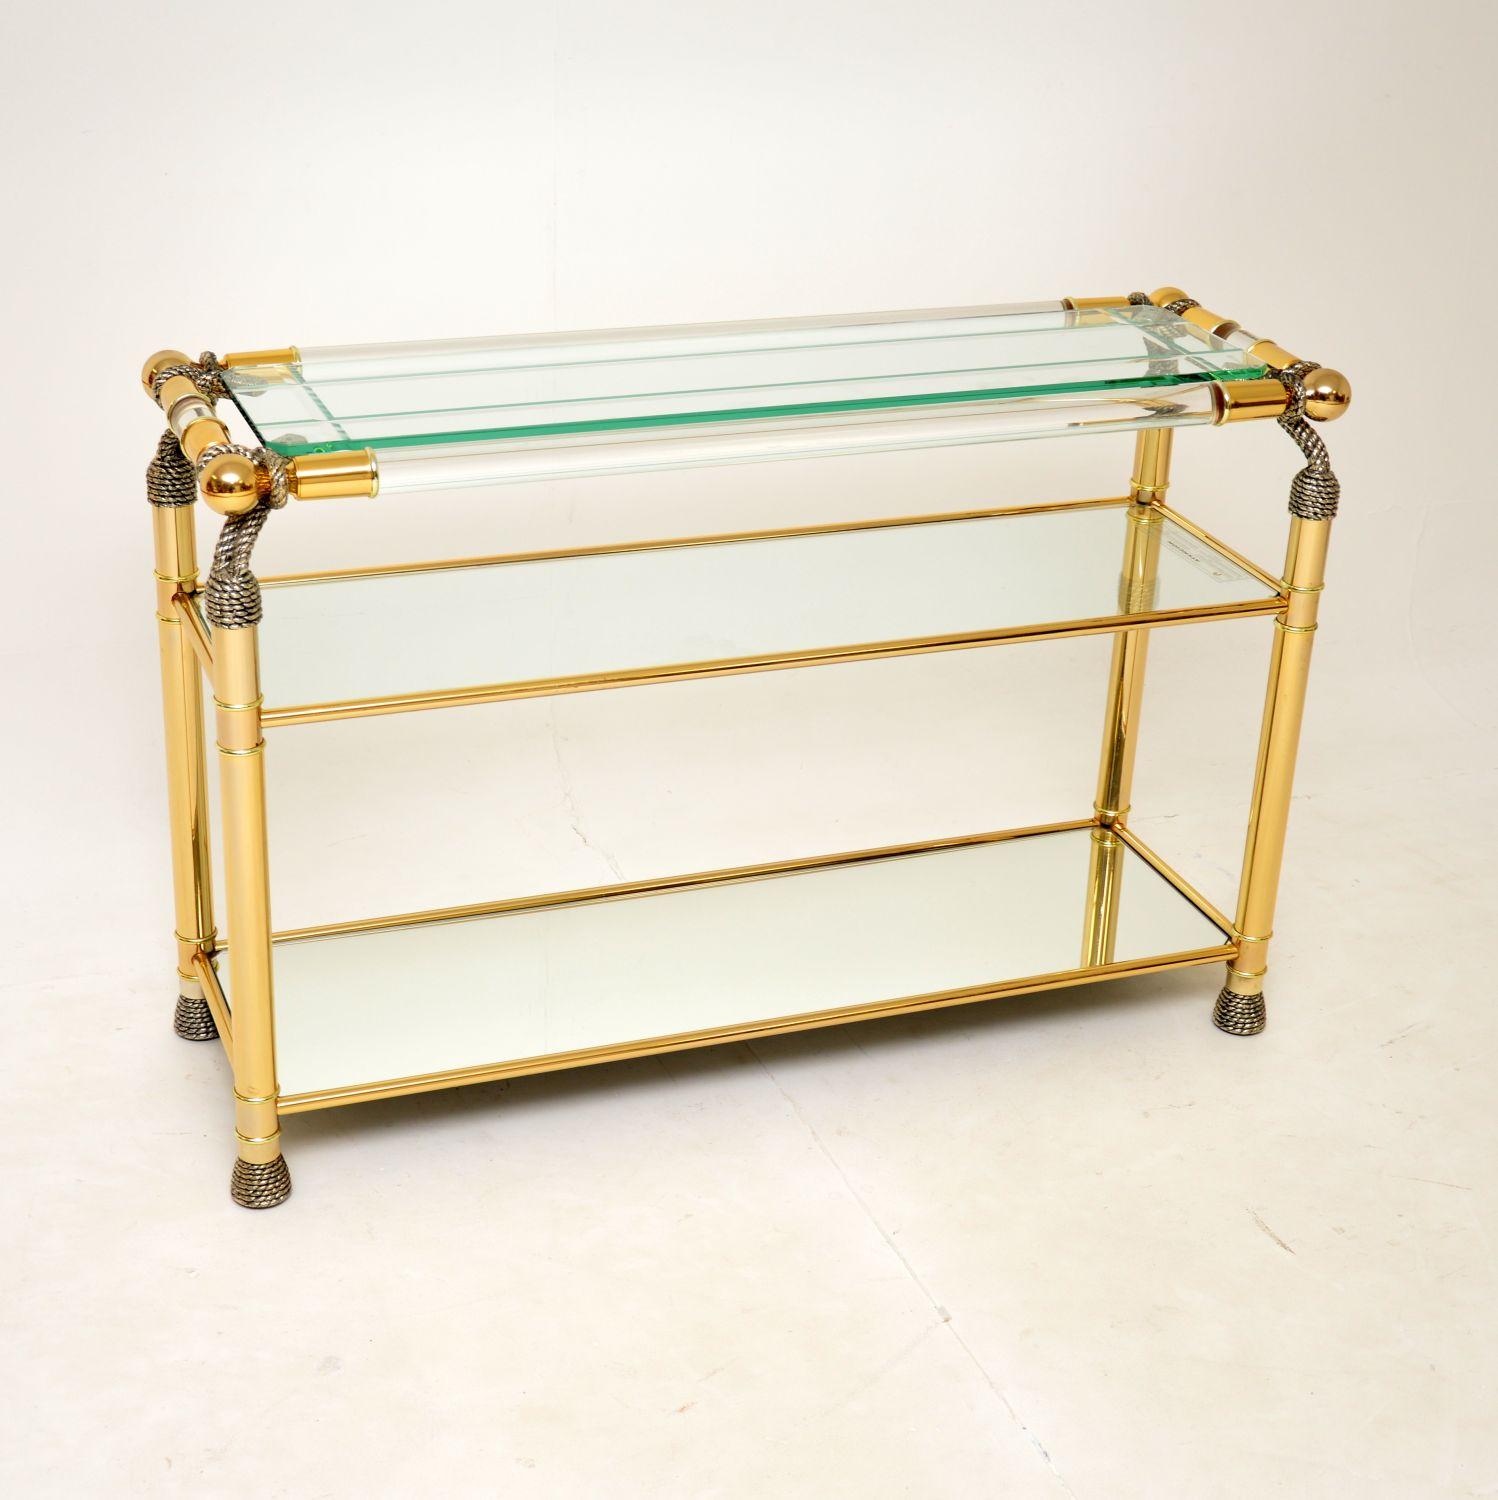 A beautiful and stylish vintage console table made by Curvasa in Spain, dating from the 1970’s.

It is of super quality and has a gorgeous design. The frame is clear lucite, with the legs and accents finished in gold and silver leaf. There are